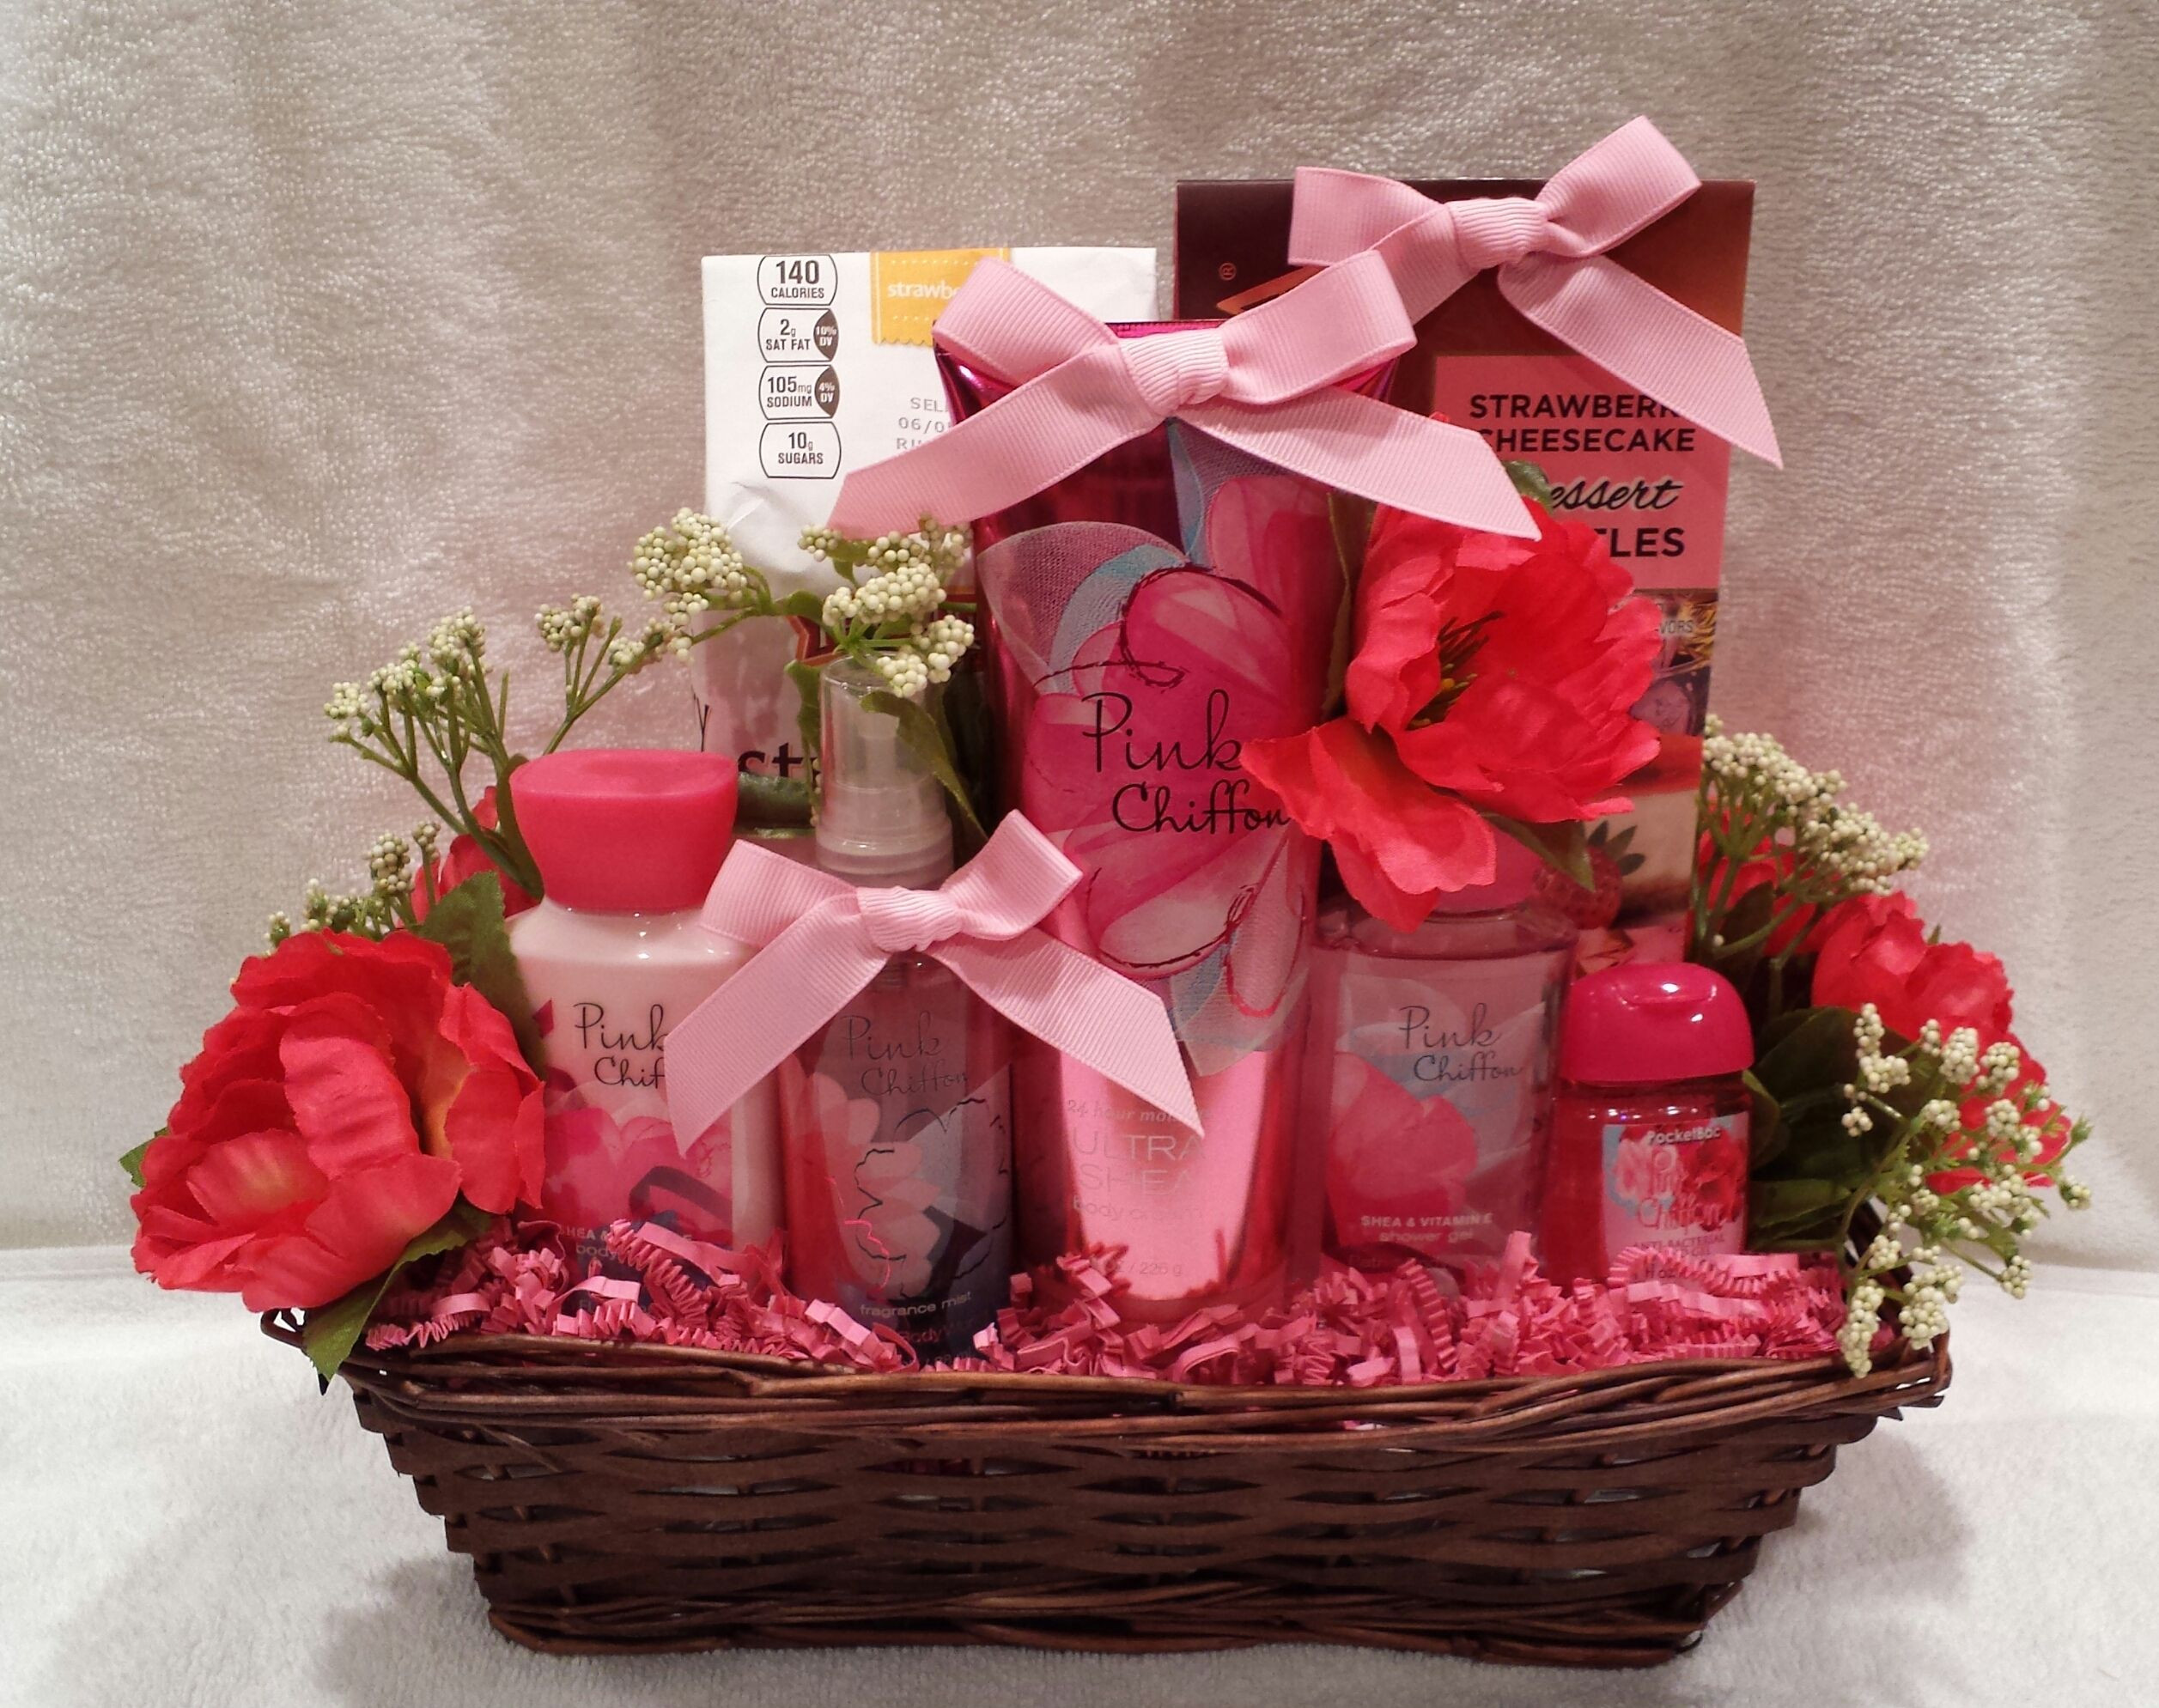 Baked Goods Gift Basket Ideas
 Shades of Pink Chiffon Gift Basket by Gifted Occakesions n